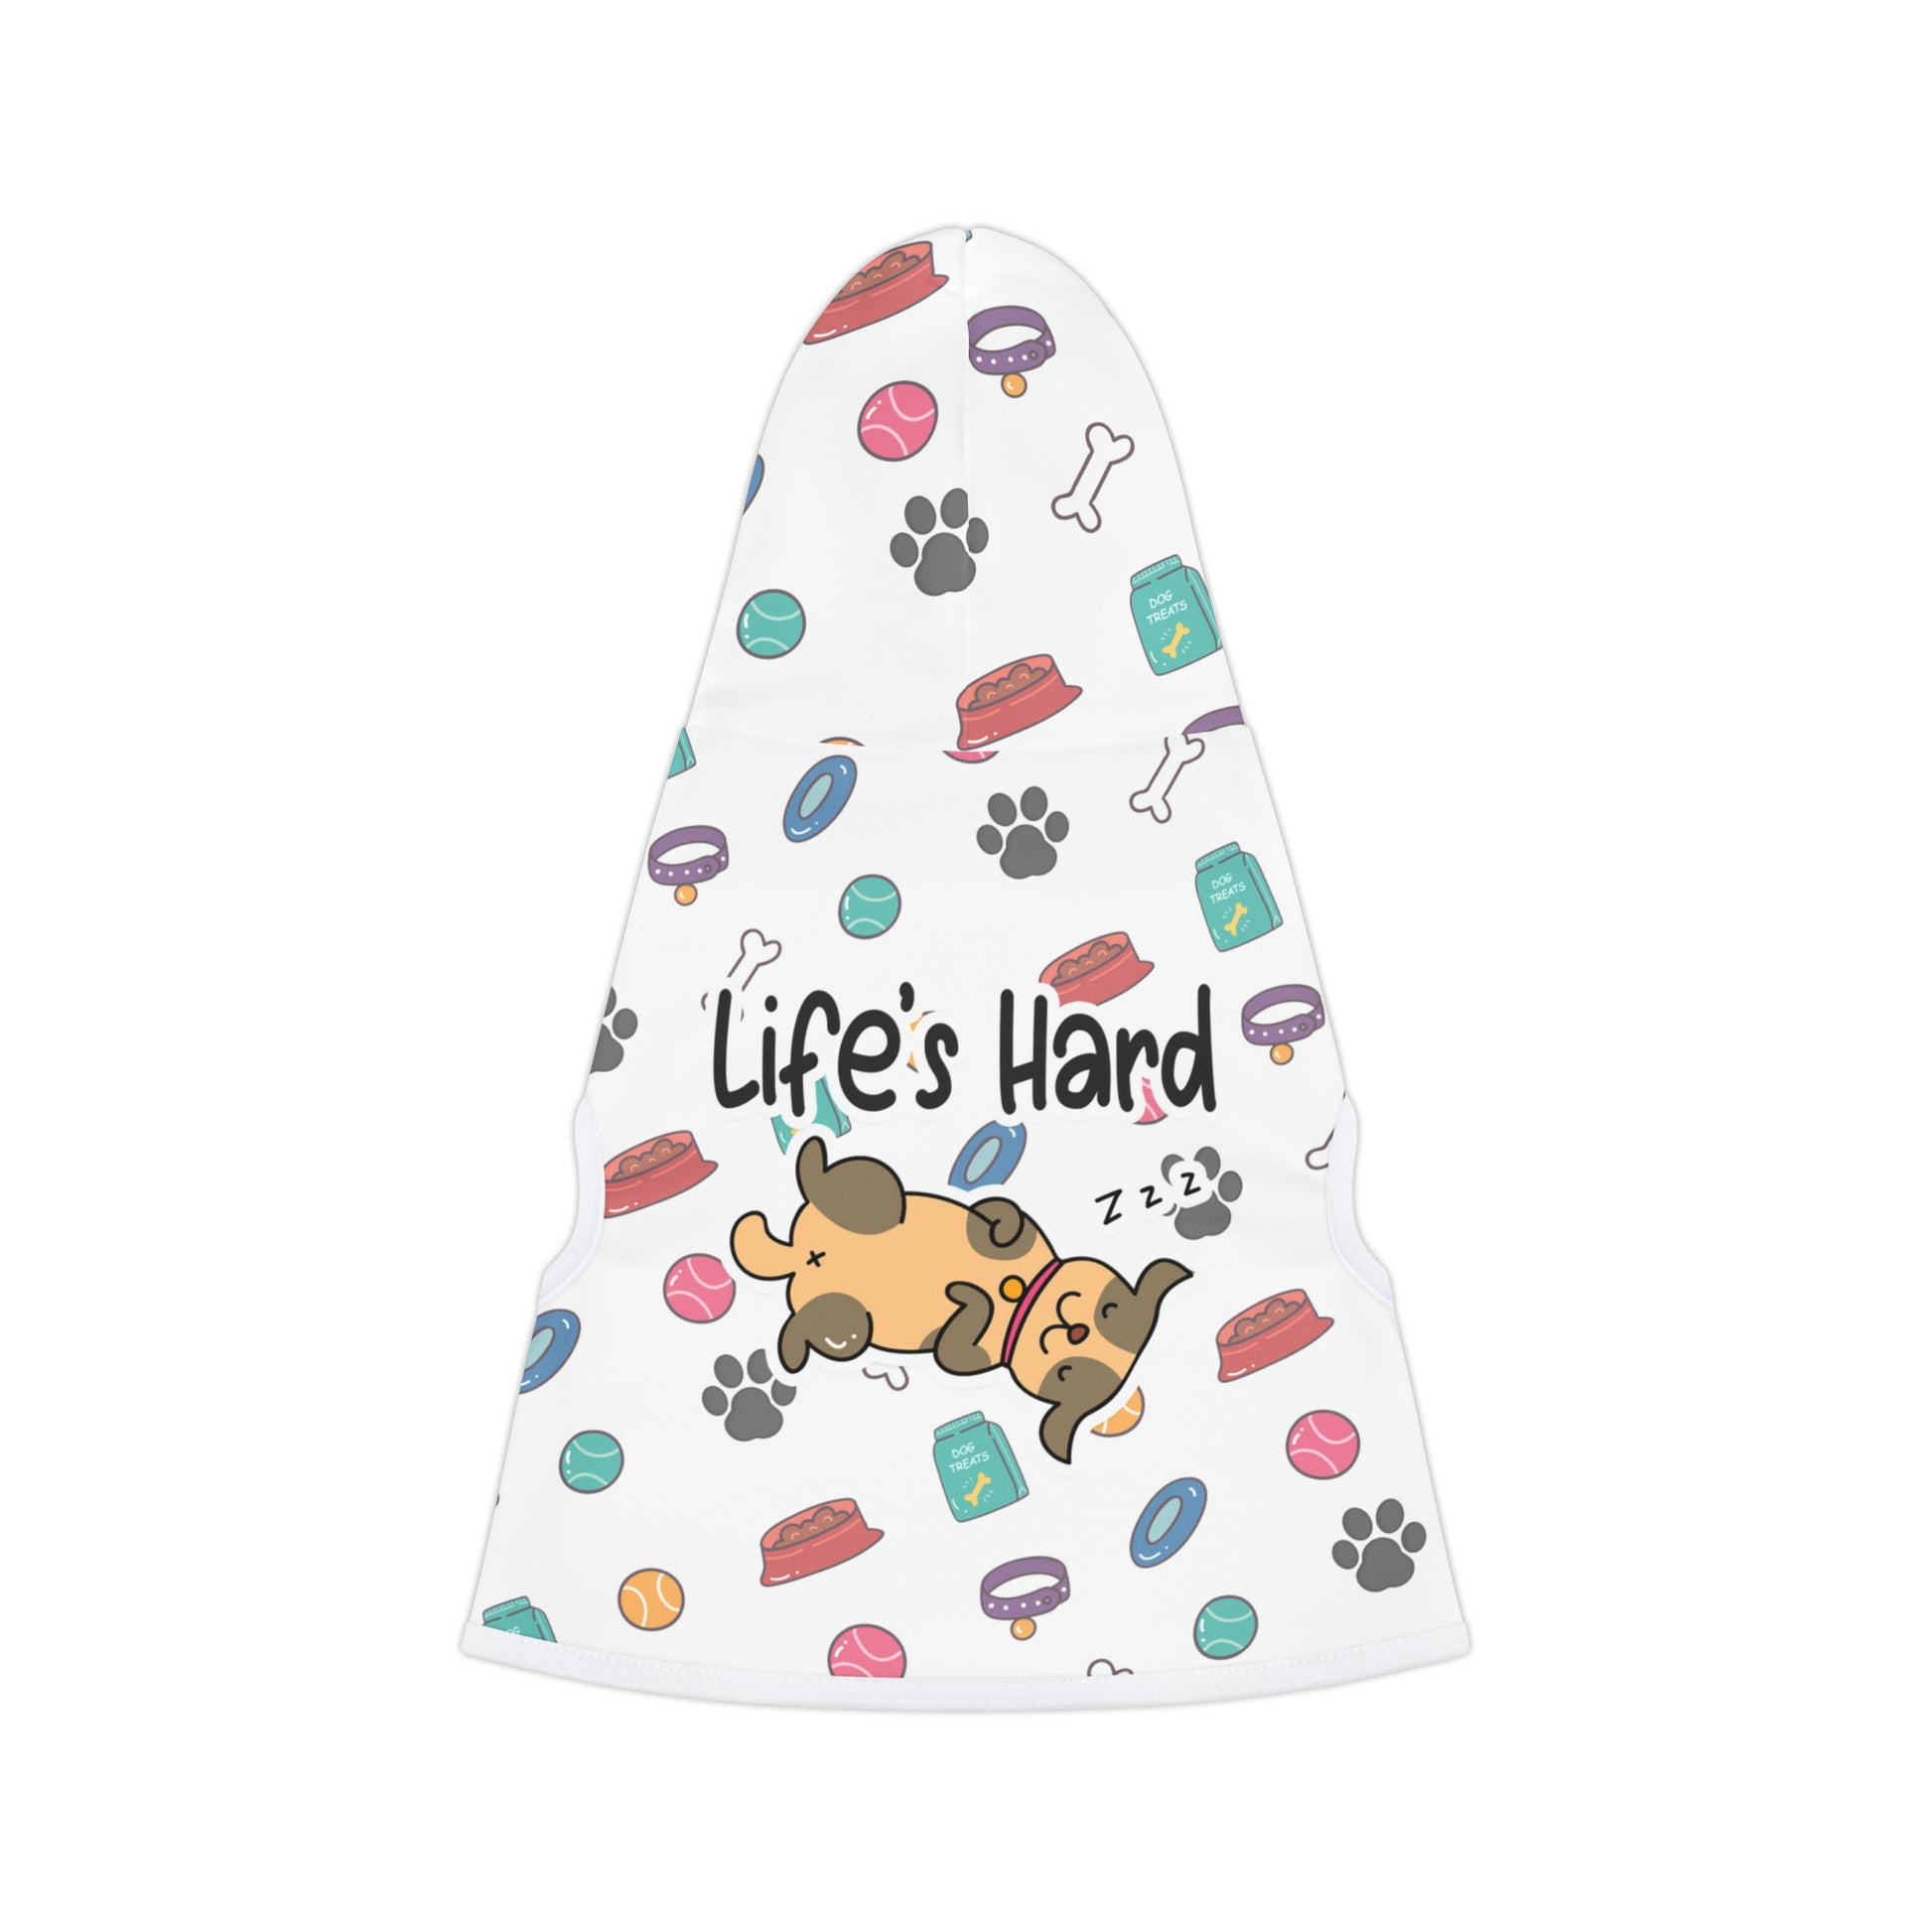 A pet hoodie with a beautiful pattern design featuring all things dog love. A smiling dog sleeping below a message that says "Life's hard". Hoodie's Color is white